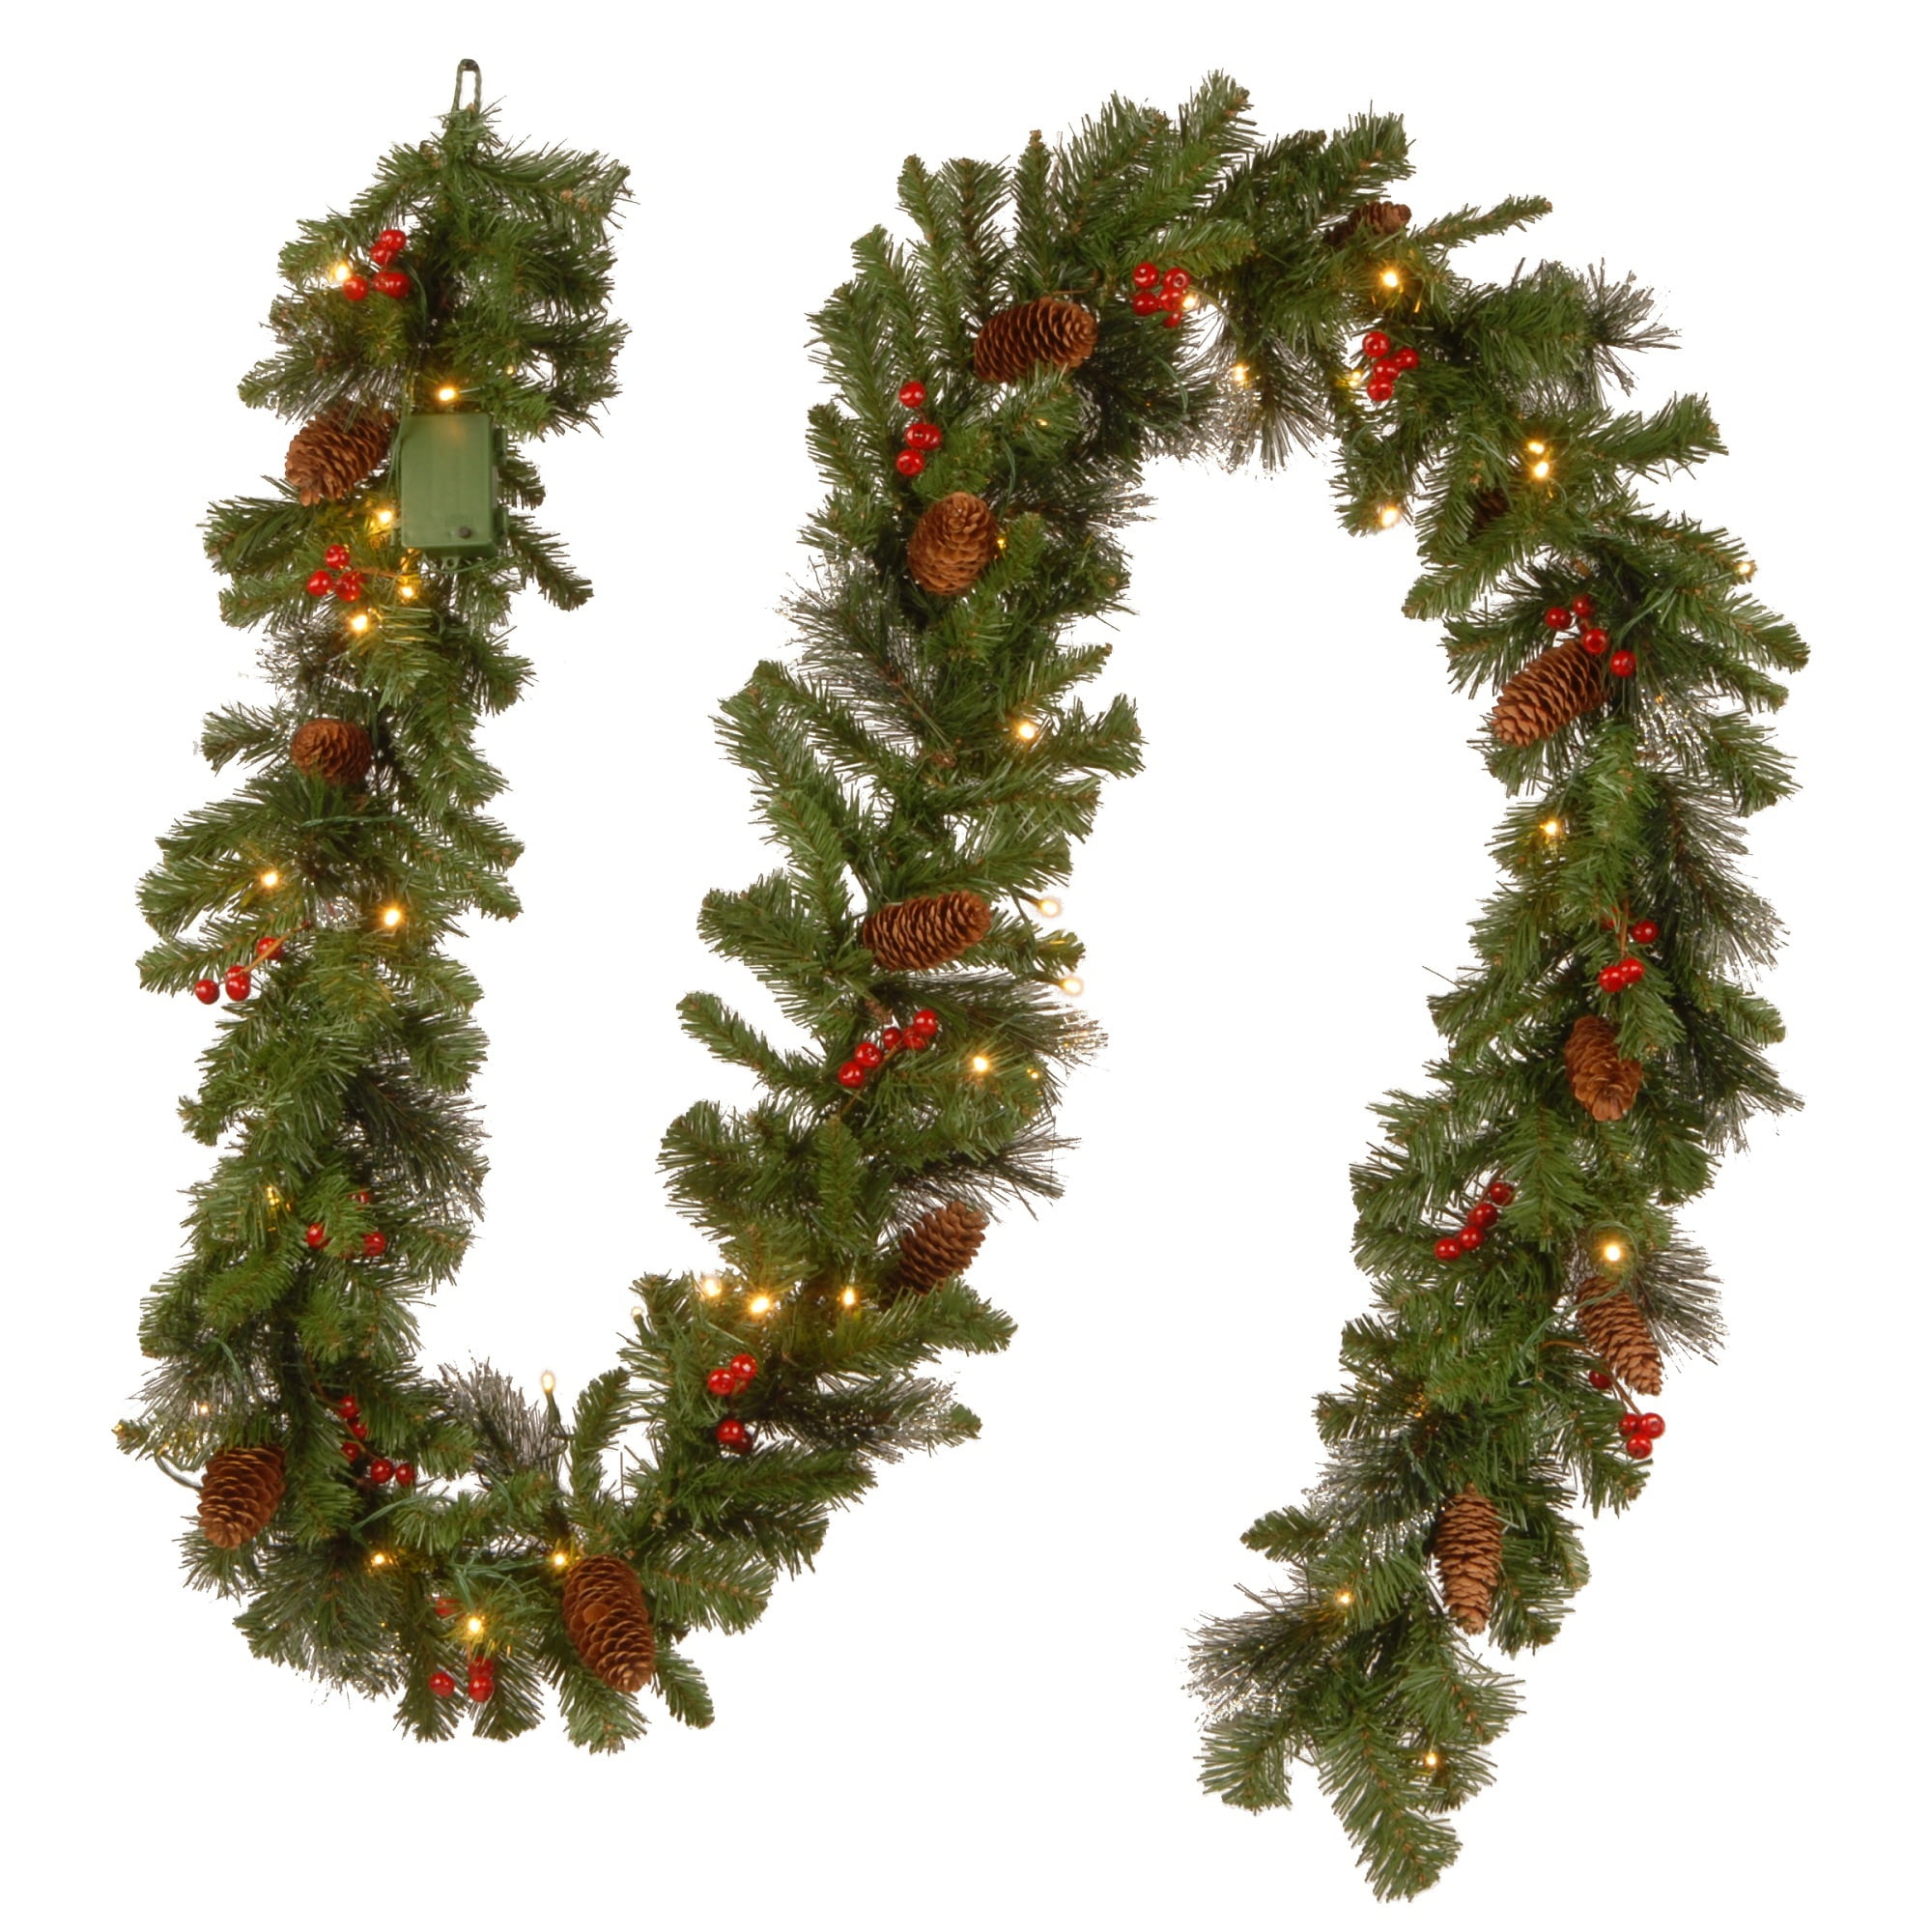 Details about   9FT Spruce Garland w/ 50 LED Light Silver Bristle Cone Berries Xmas Decoration 